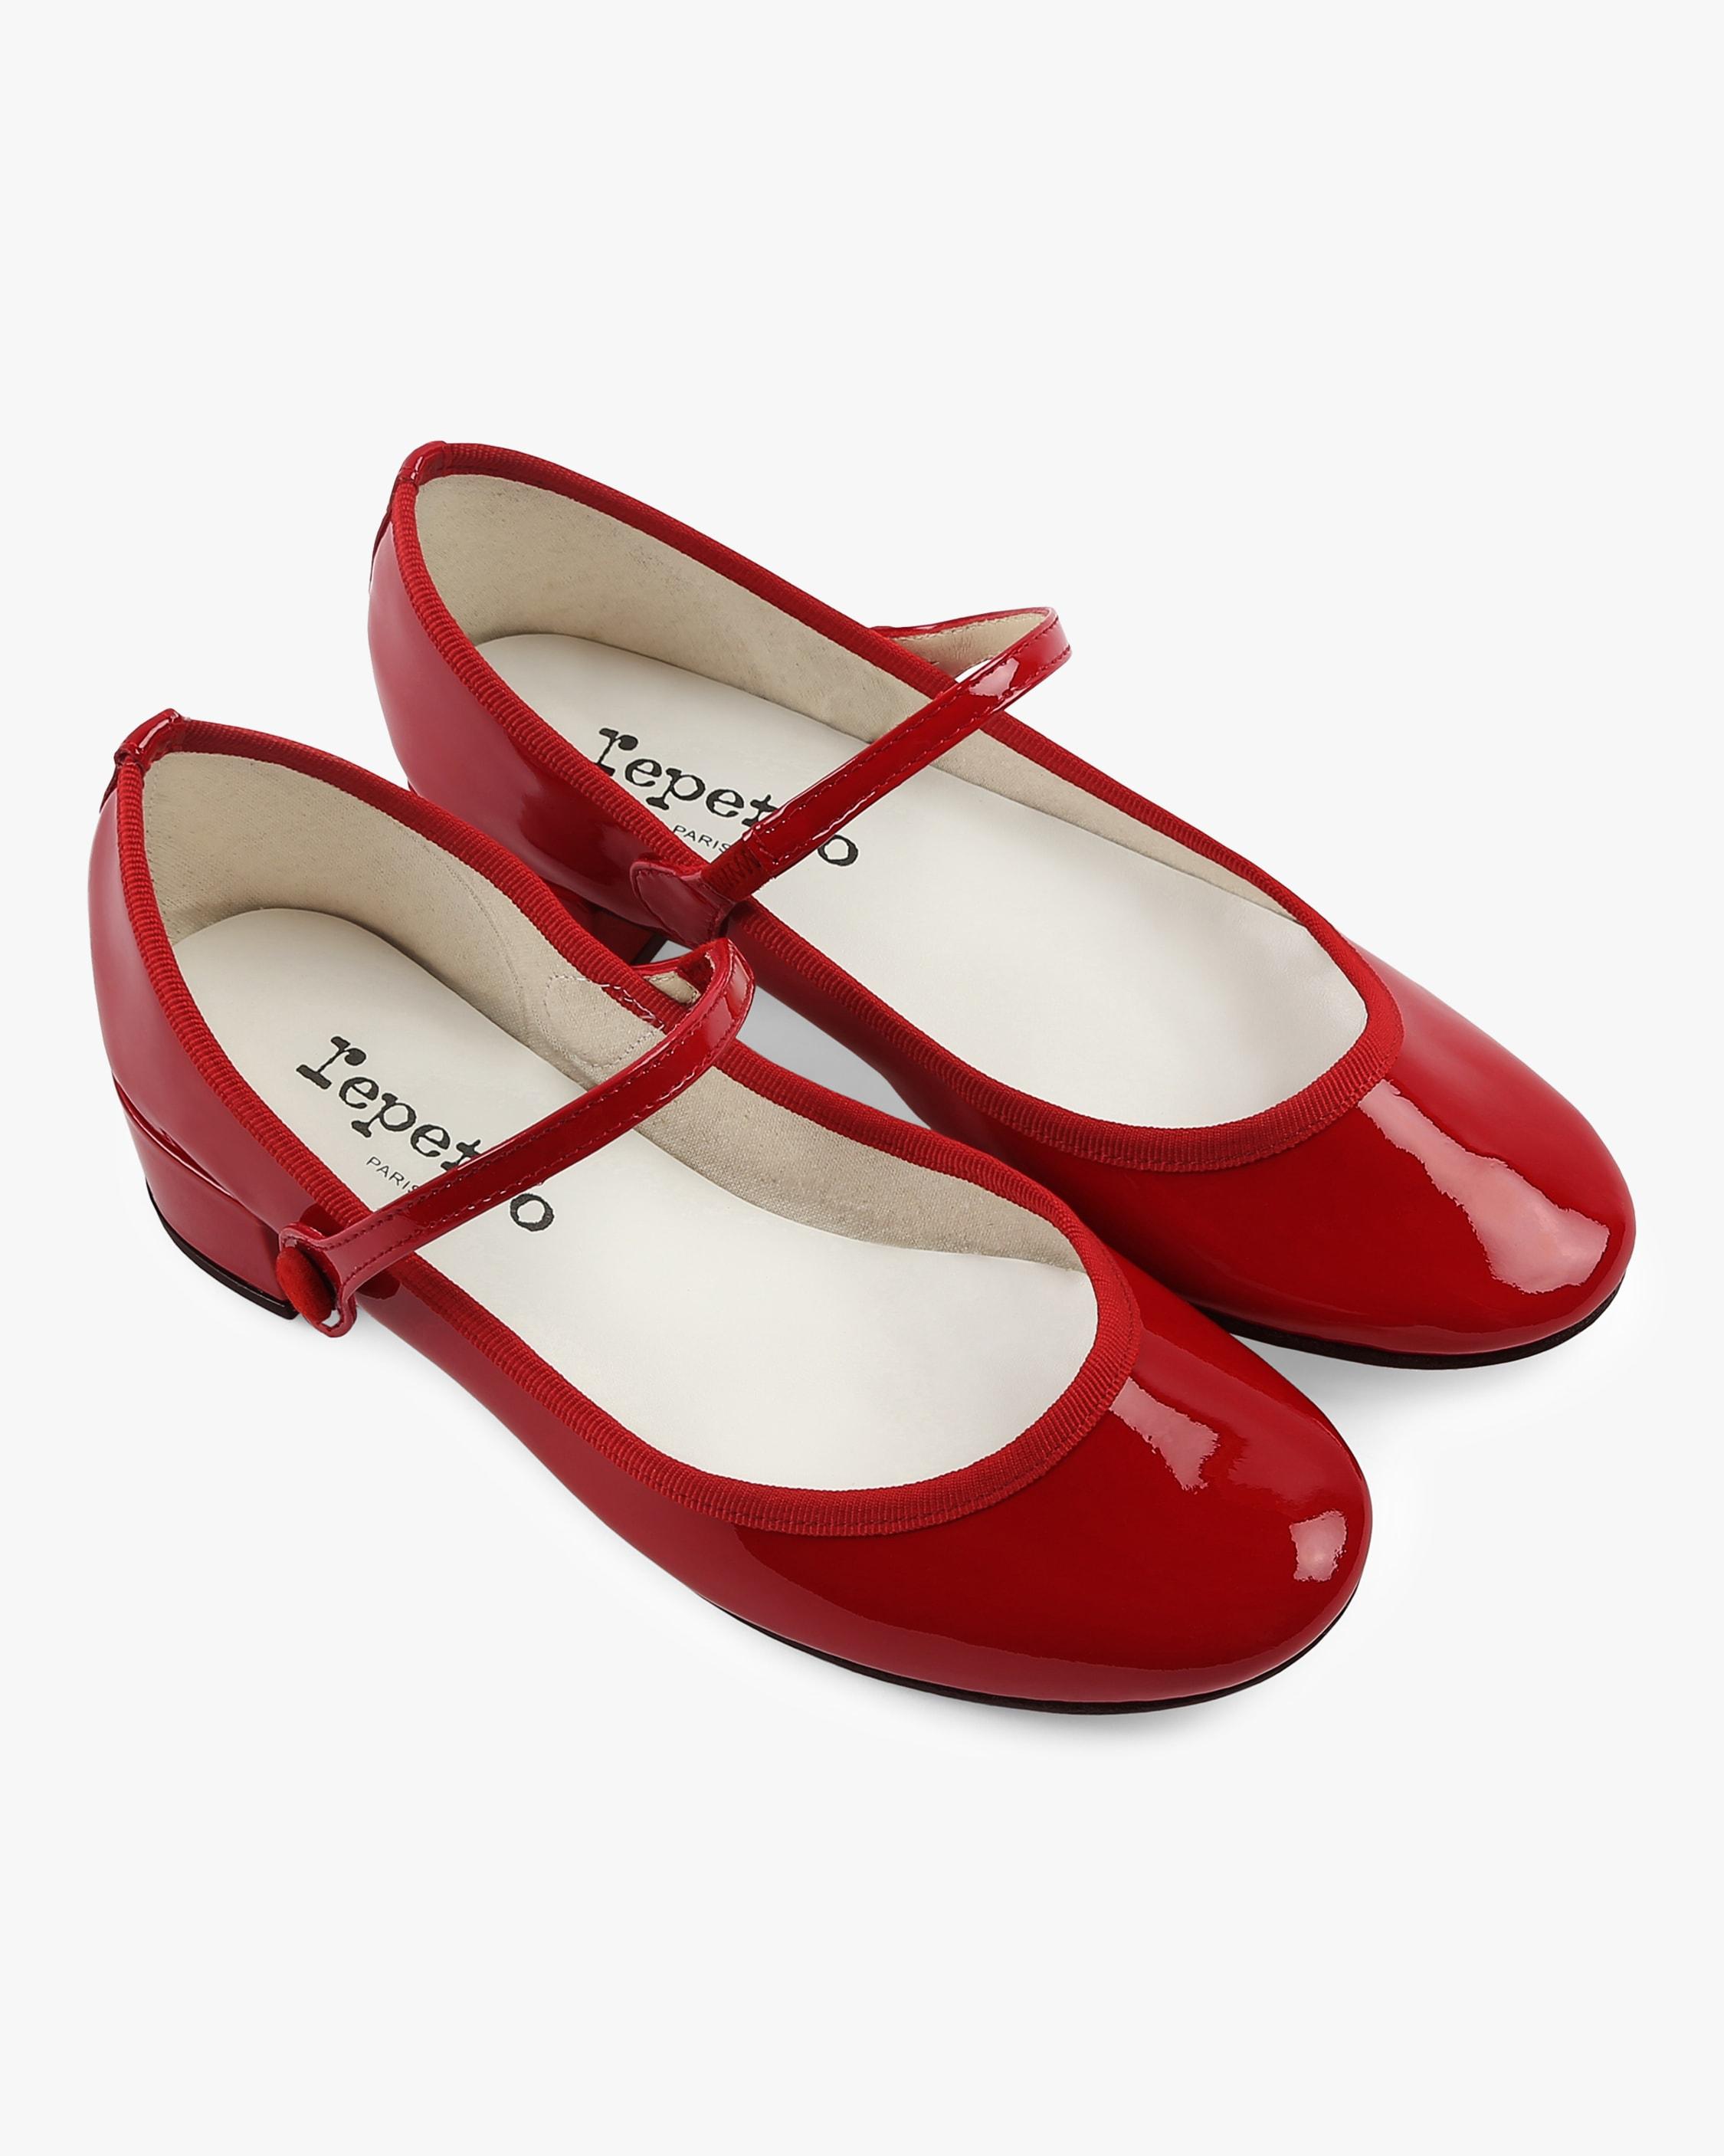 Repetto Rose Patent Leather Mary Jane Pumps in Red - Lyst